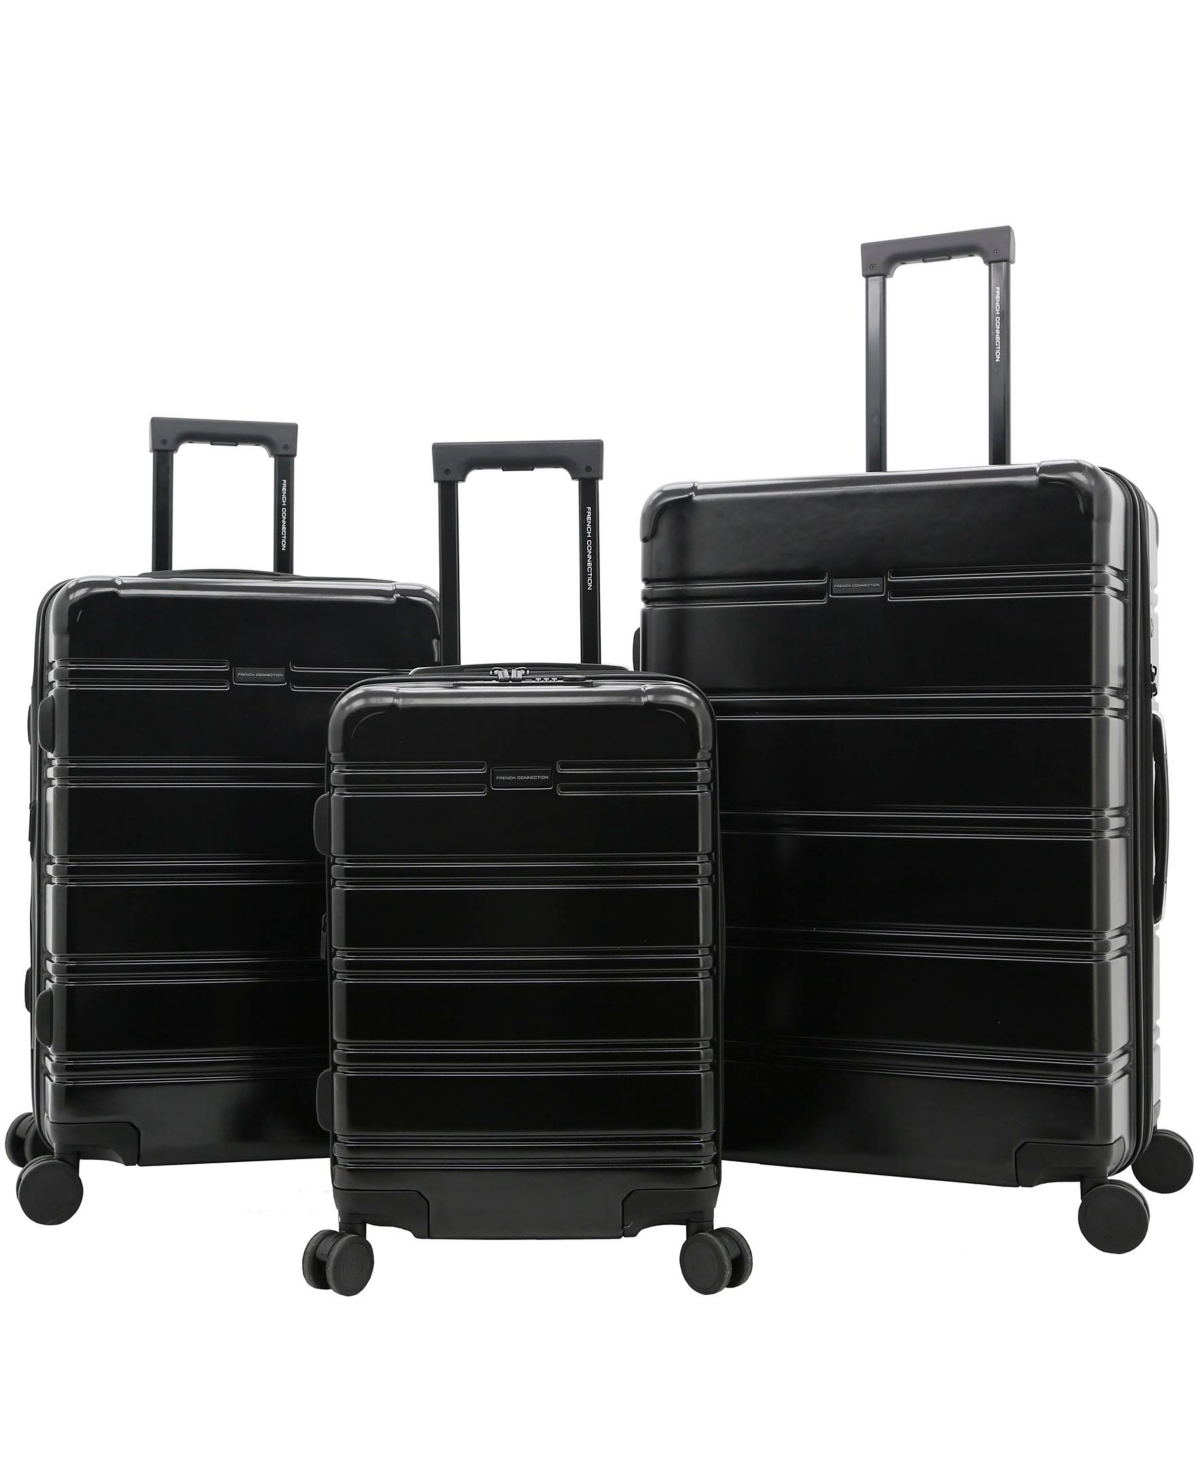 French Connection Conrad Expandable Rolling Hardside Luggage Set, 3 Piece In Black